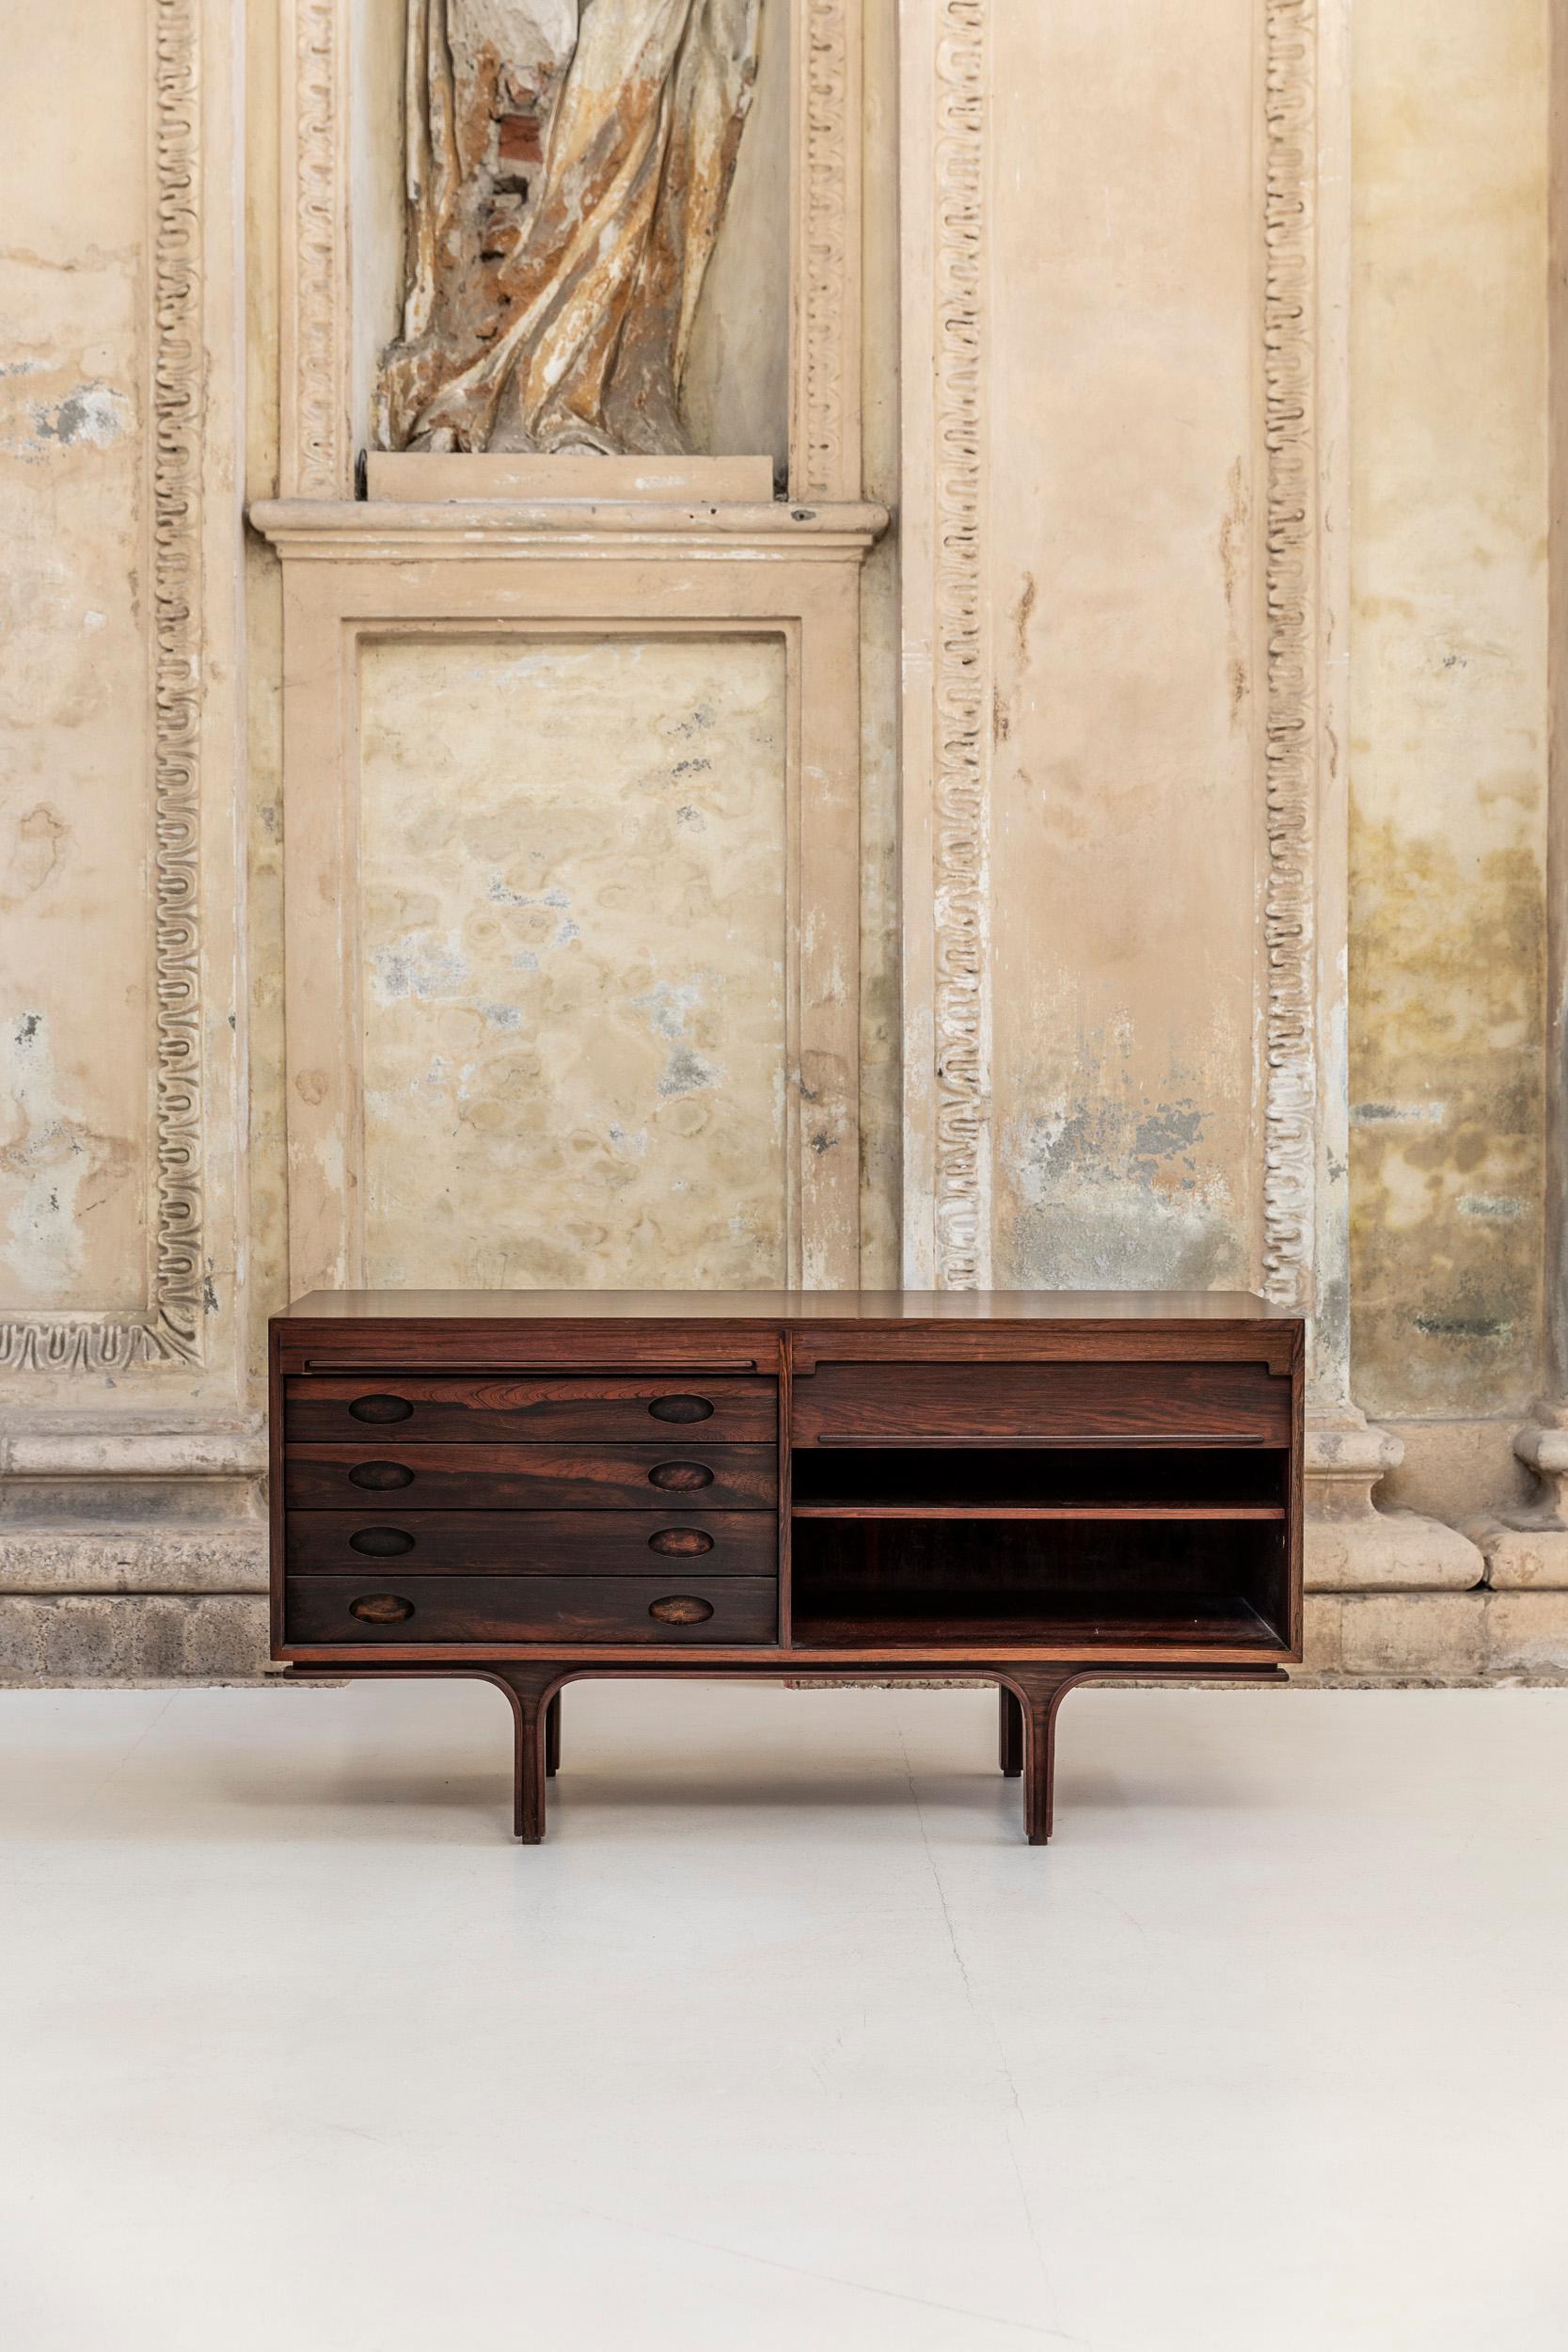 Iconic sideboard design by Gianfranco Frattini, manufactured by Bernini in Italy 1960. 
Two vertical tambour doors, four drawers on the left side and adjustable shelve in the other section.
Beautiful details and finishes.